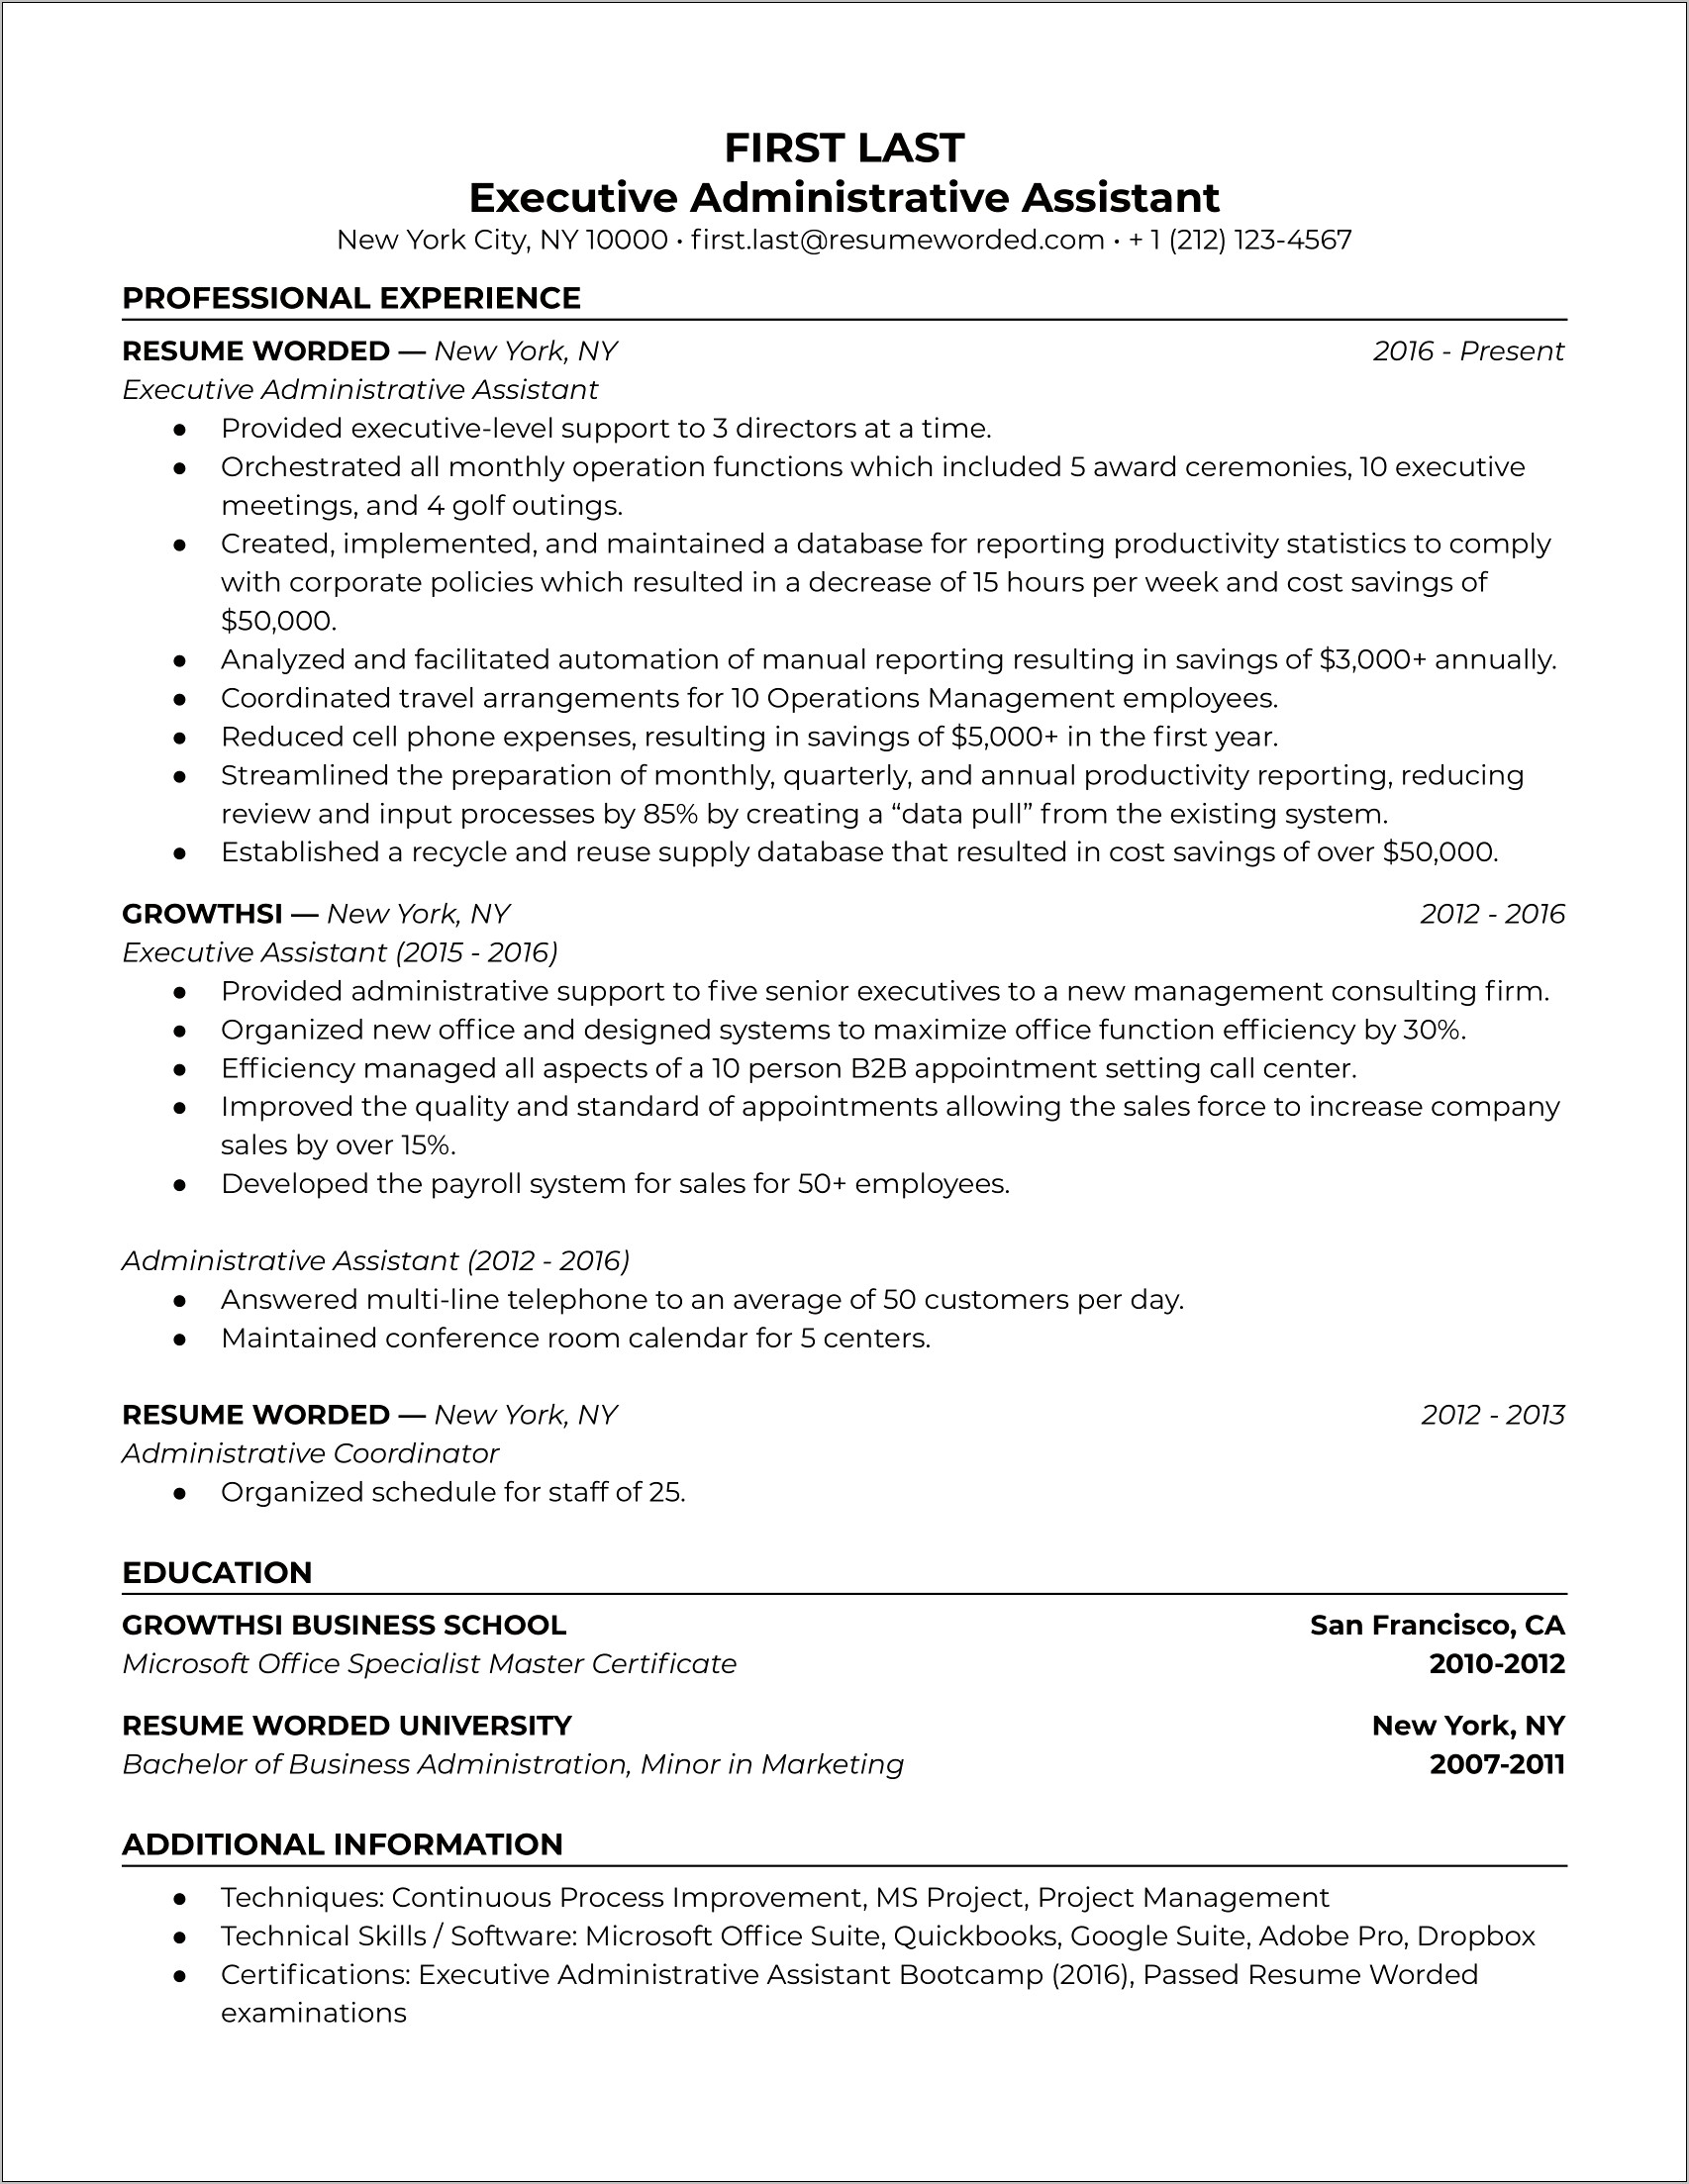 Executive Administrative Assistant Resume Sample 2014